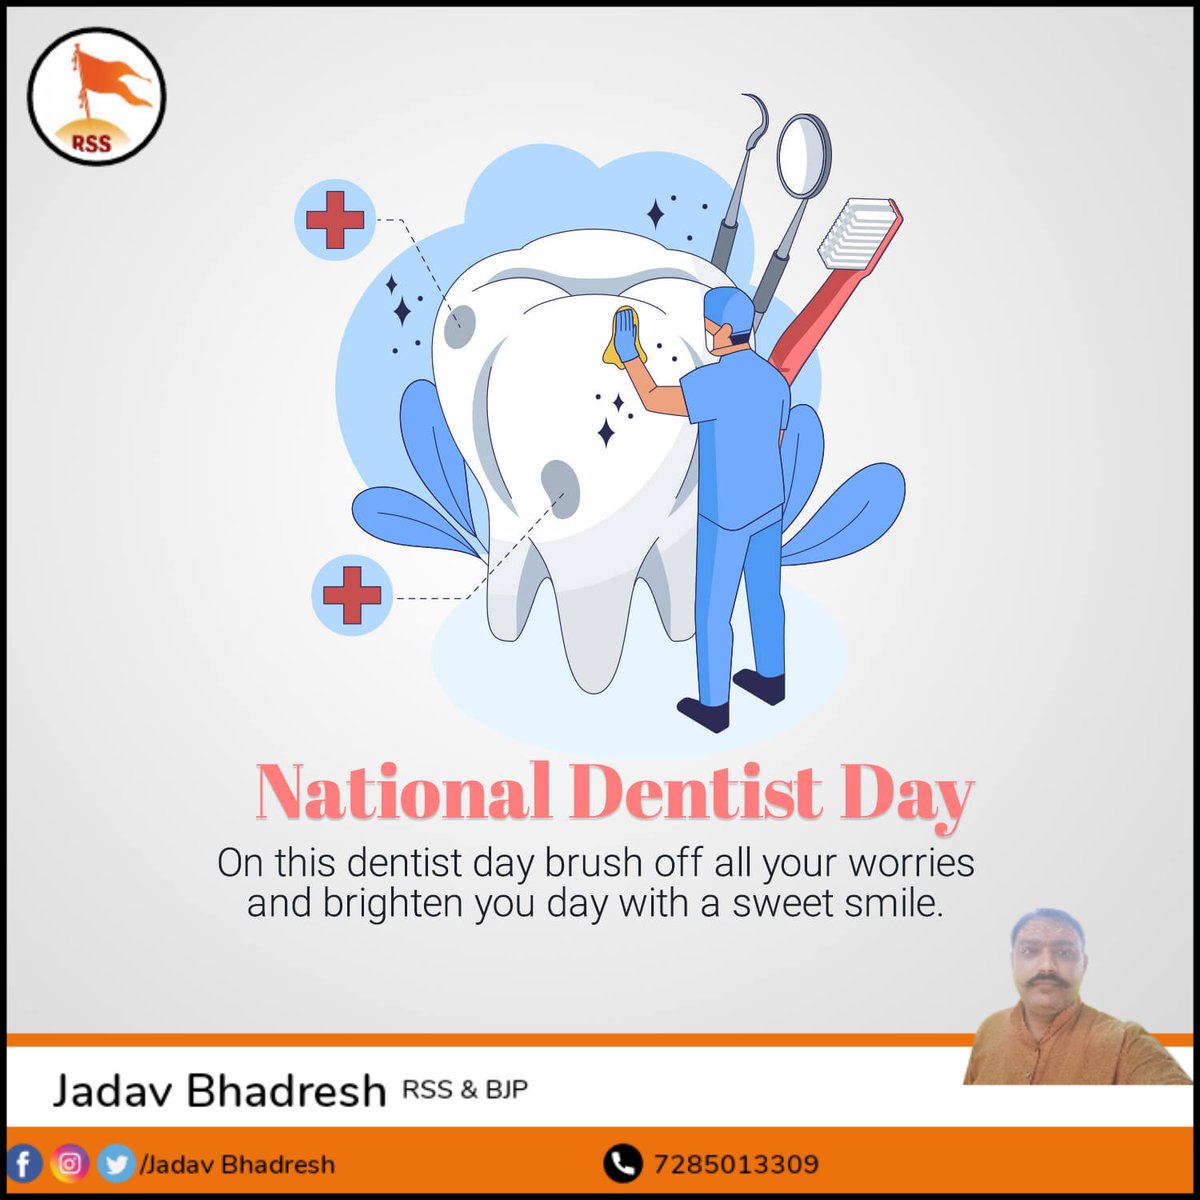 👨‍⚕️National Dentist Day is observed every 6th March to appreciate the contribution of dentists in oral health & promoting oral health🦷

👨‍⚕️Happy #NationalDentistDay to everyone🦷

🦷My thanks to all dentist who play a vital role in our #DentalHealth🩺

@AmerDentalAssn @ADAADental